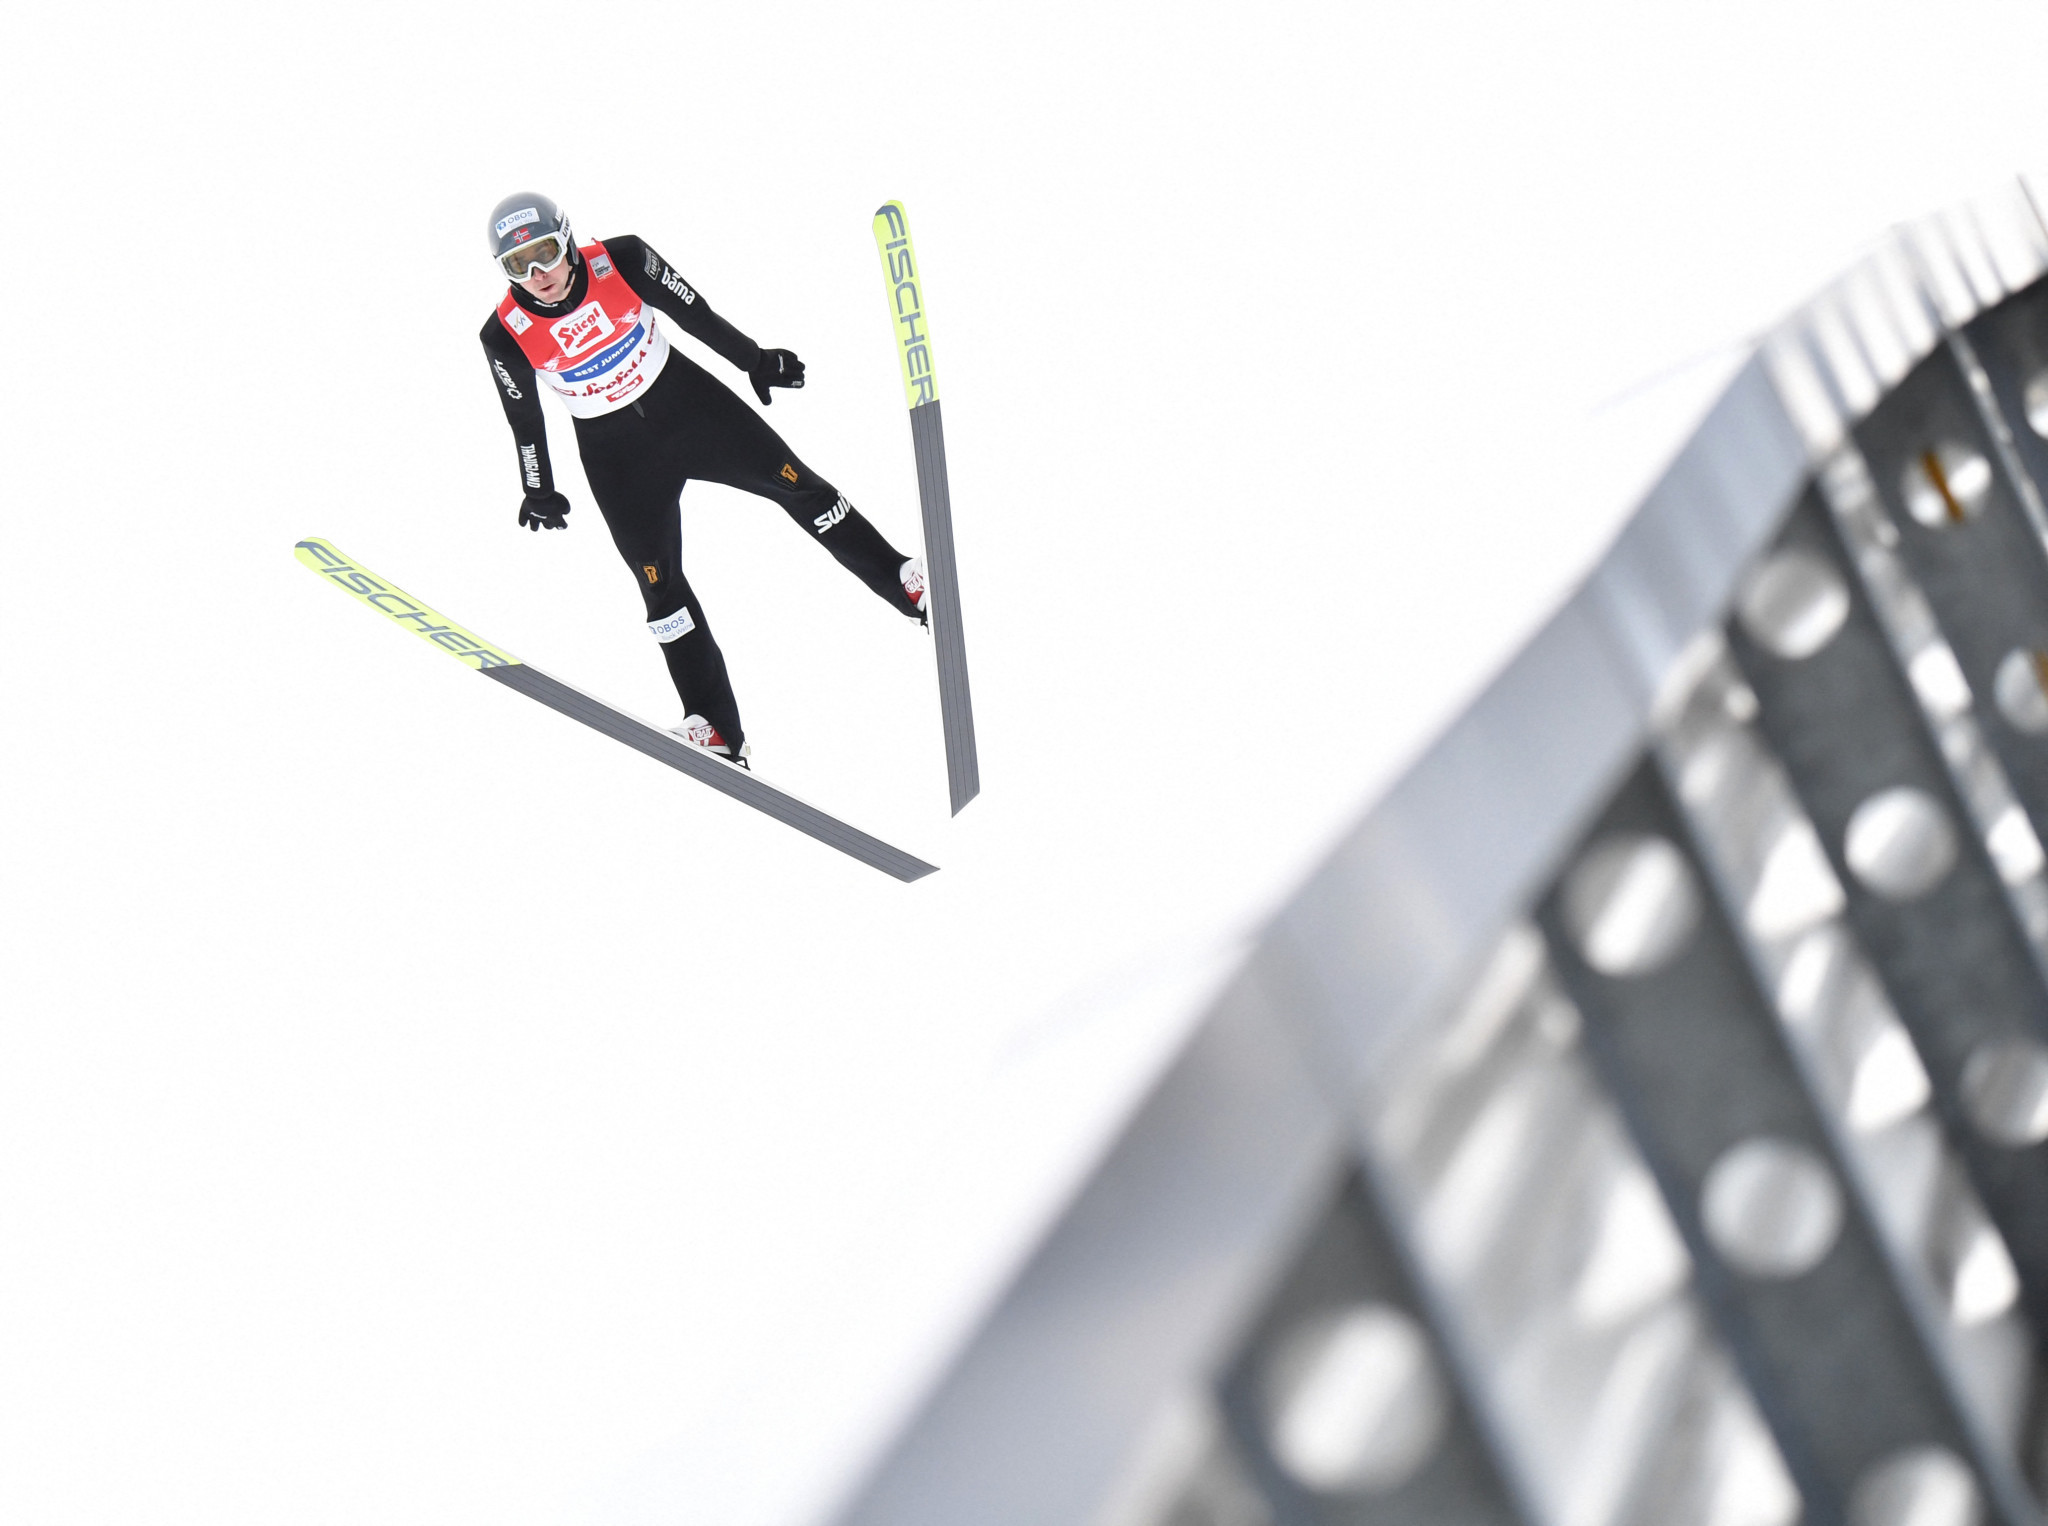 Jarl Magnus Riiber is seeking to win the Nordic Combined World Cup for a fifth season in a row ©Getty Images